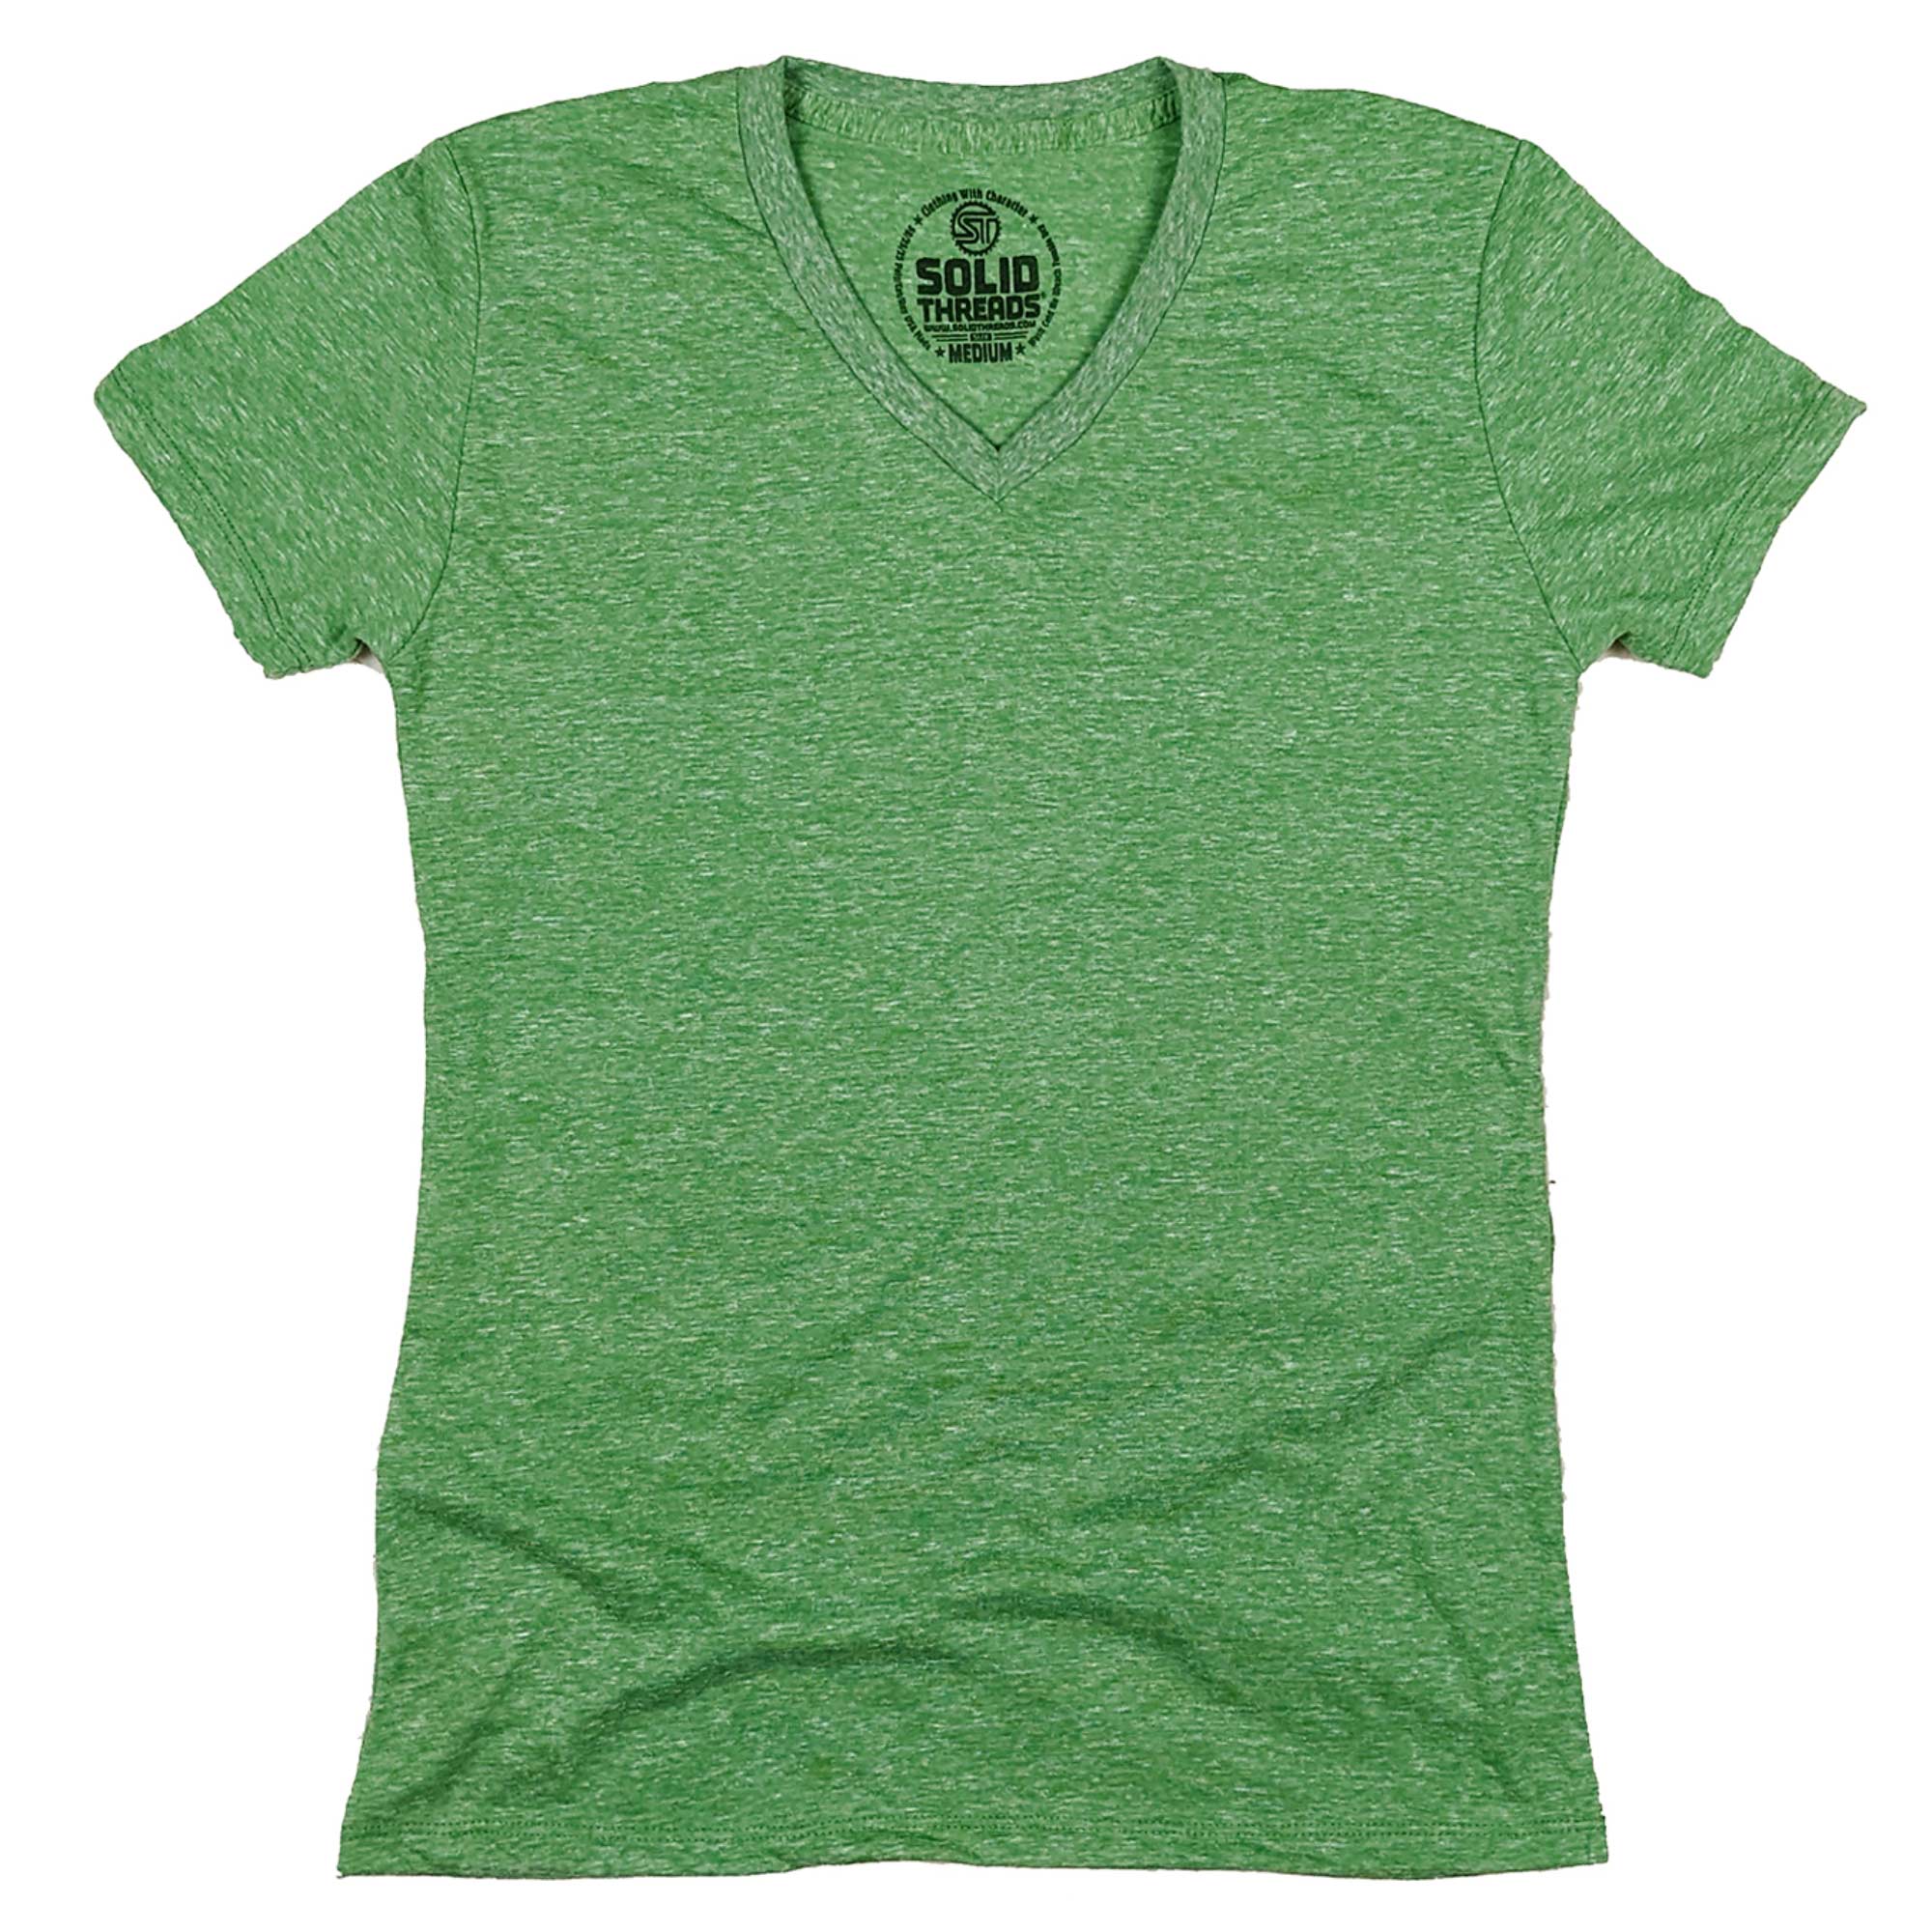 Women's Solid Threads V-Neck Triblend Kelly T-shirt | Vintage Inspired USA Made Tee